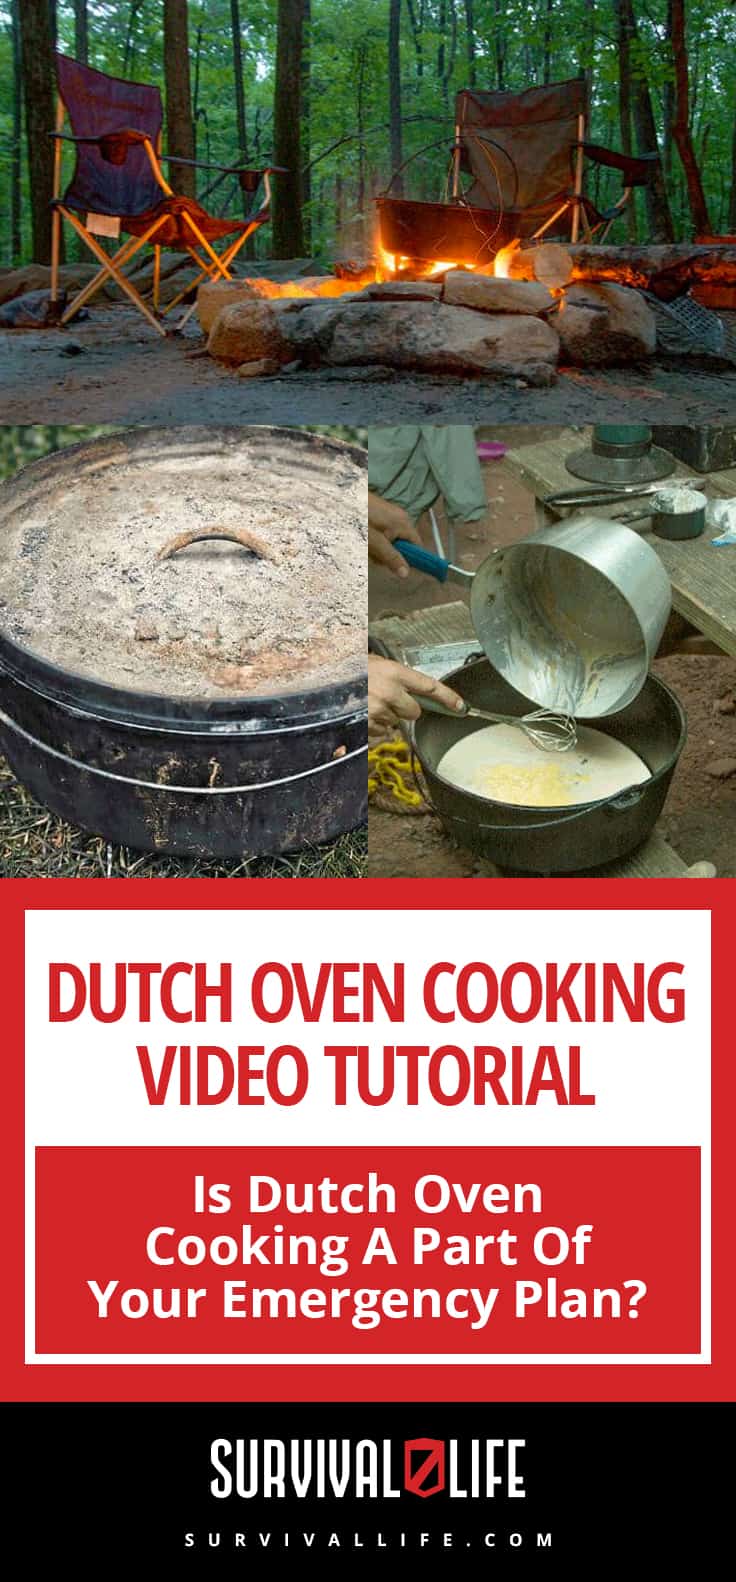 Is Dutch Oven Cooking A Part Of Your Emergency Plan? [Video Tutorial]